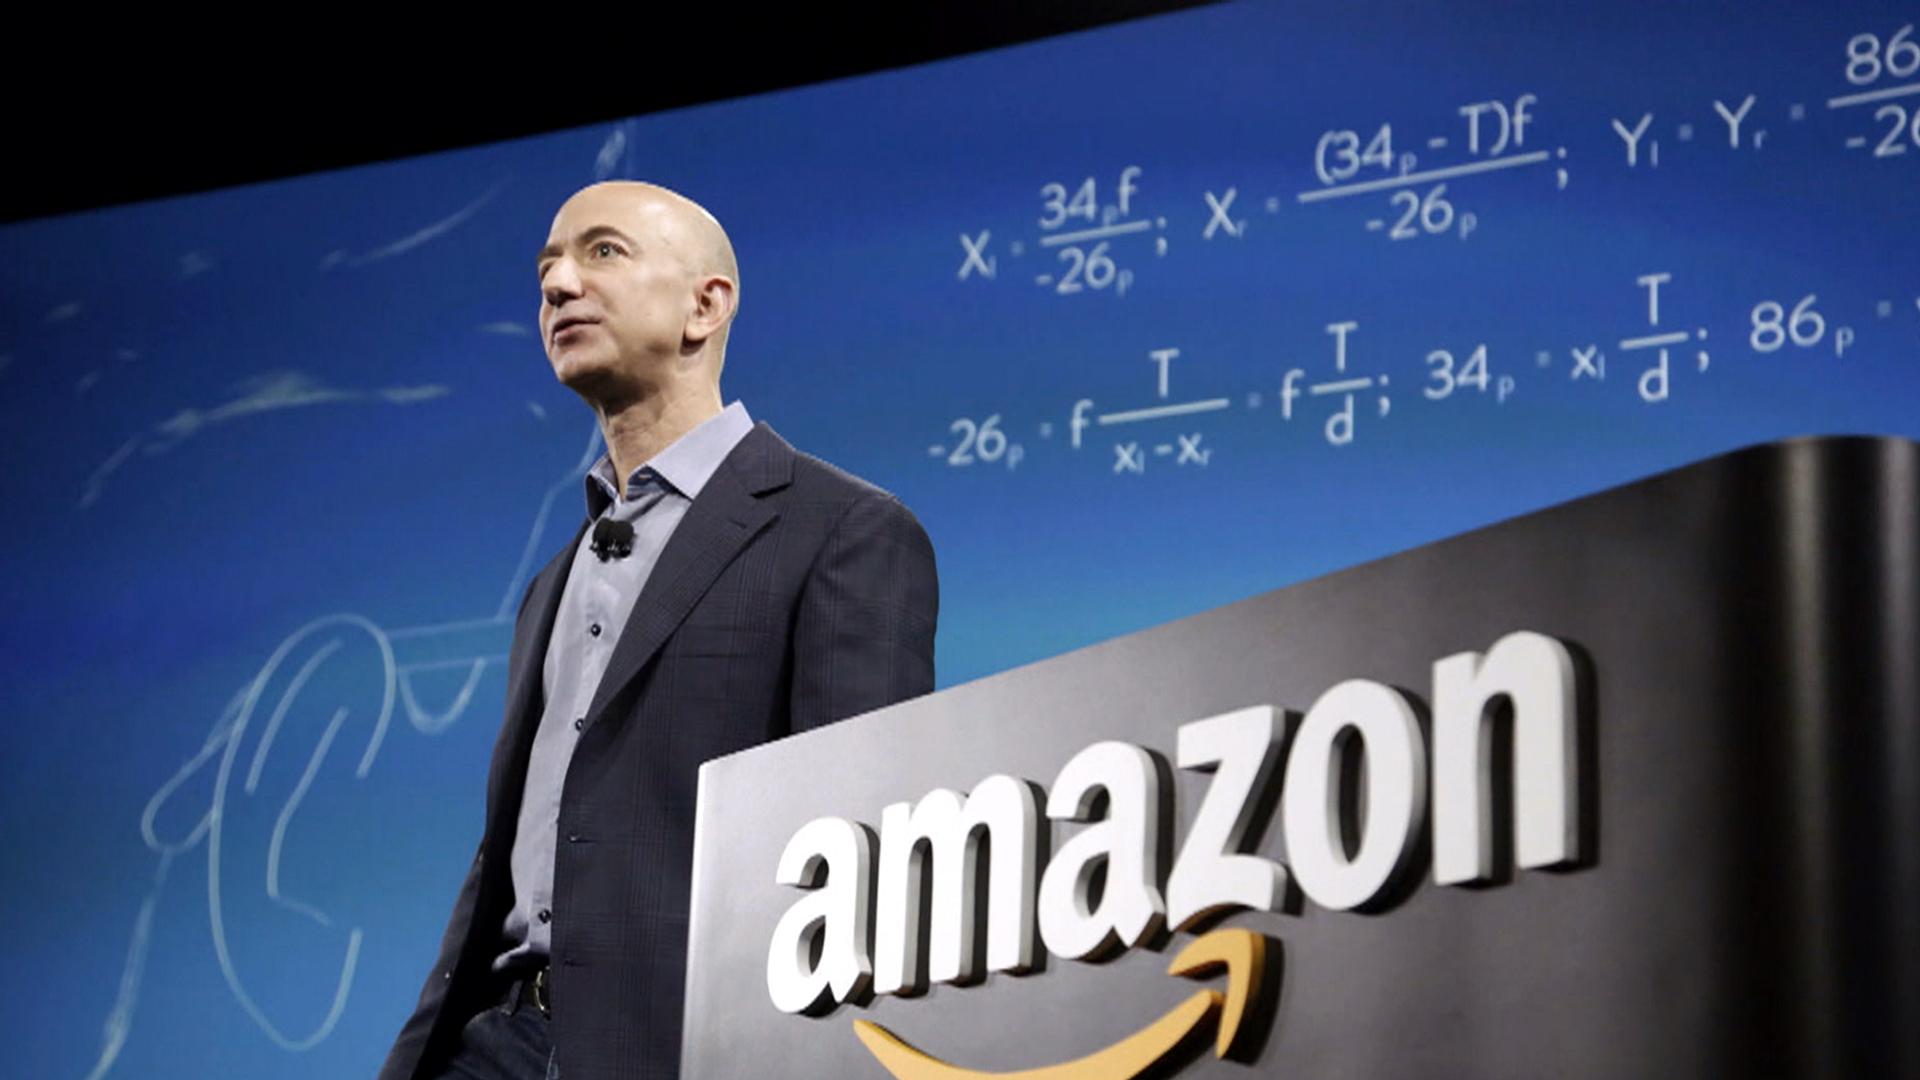 Jeff Bezos is stepping down as Amazon CEO